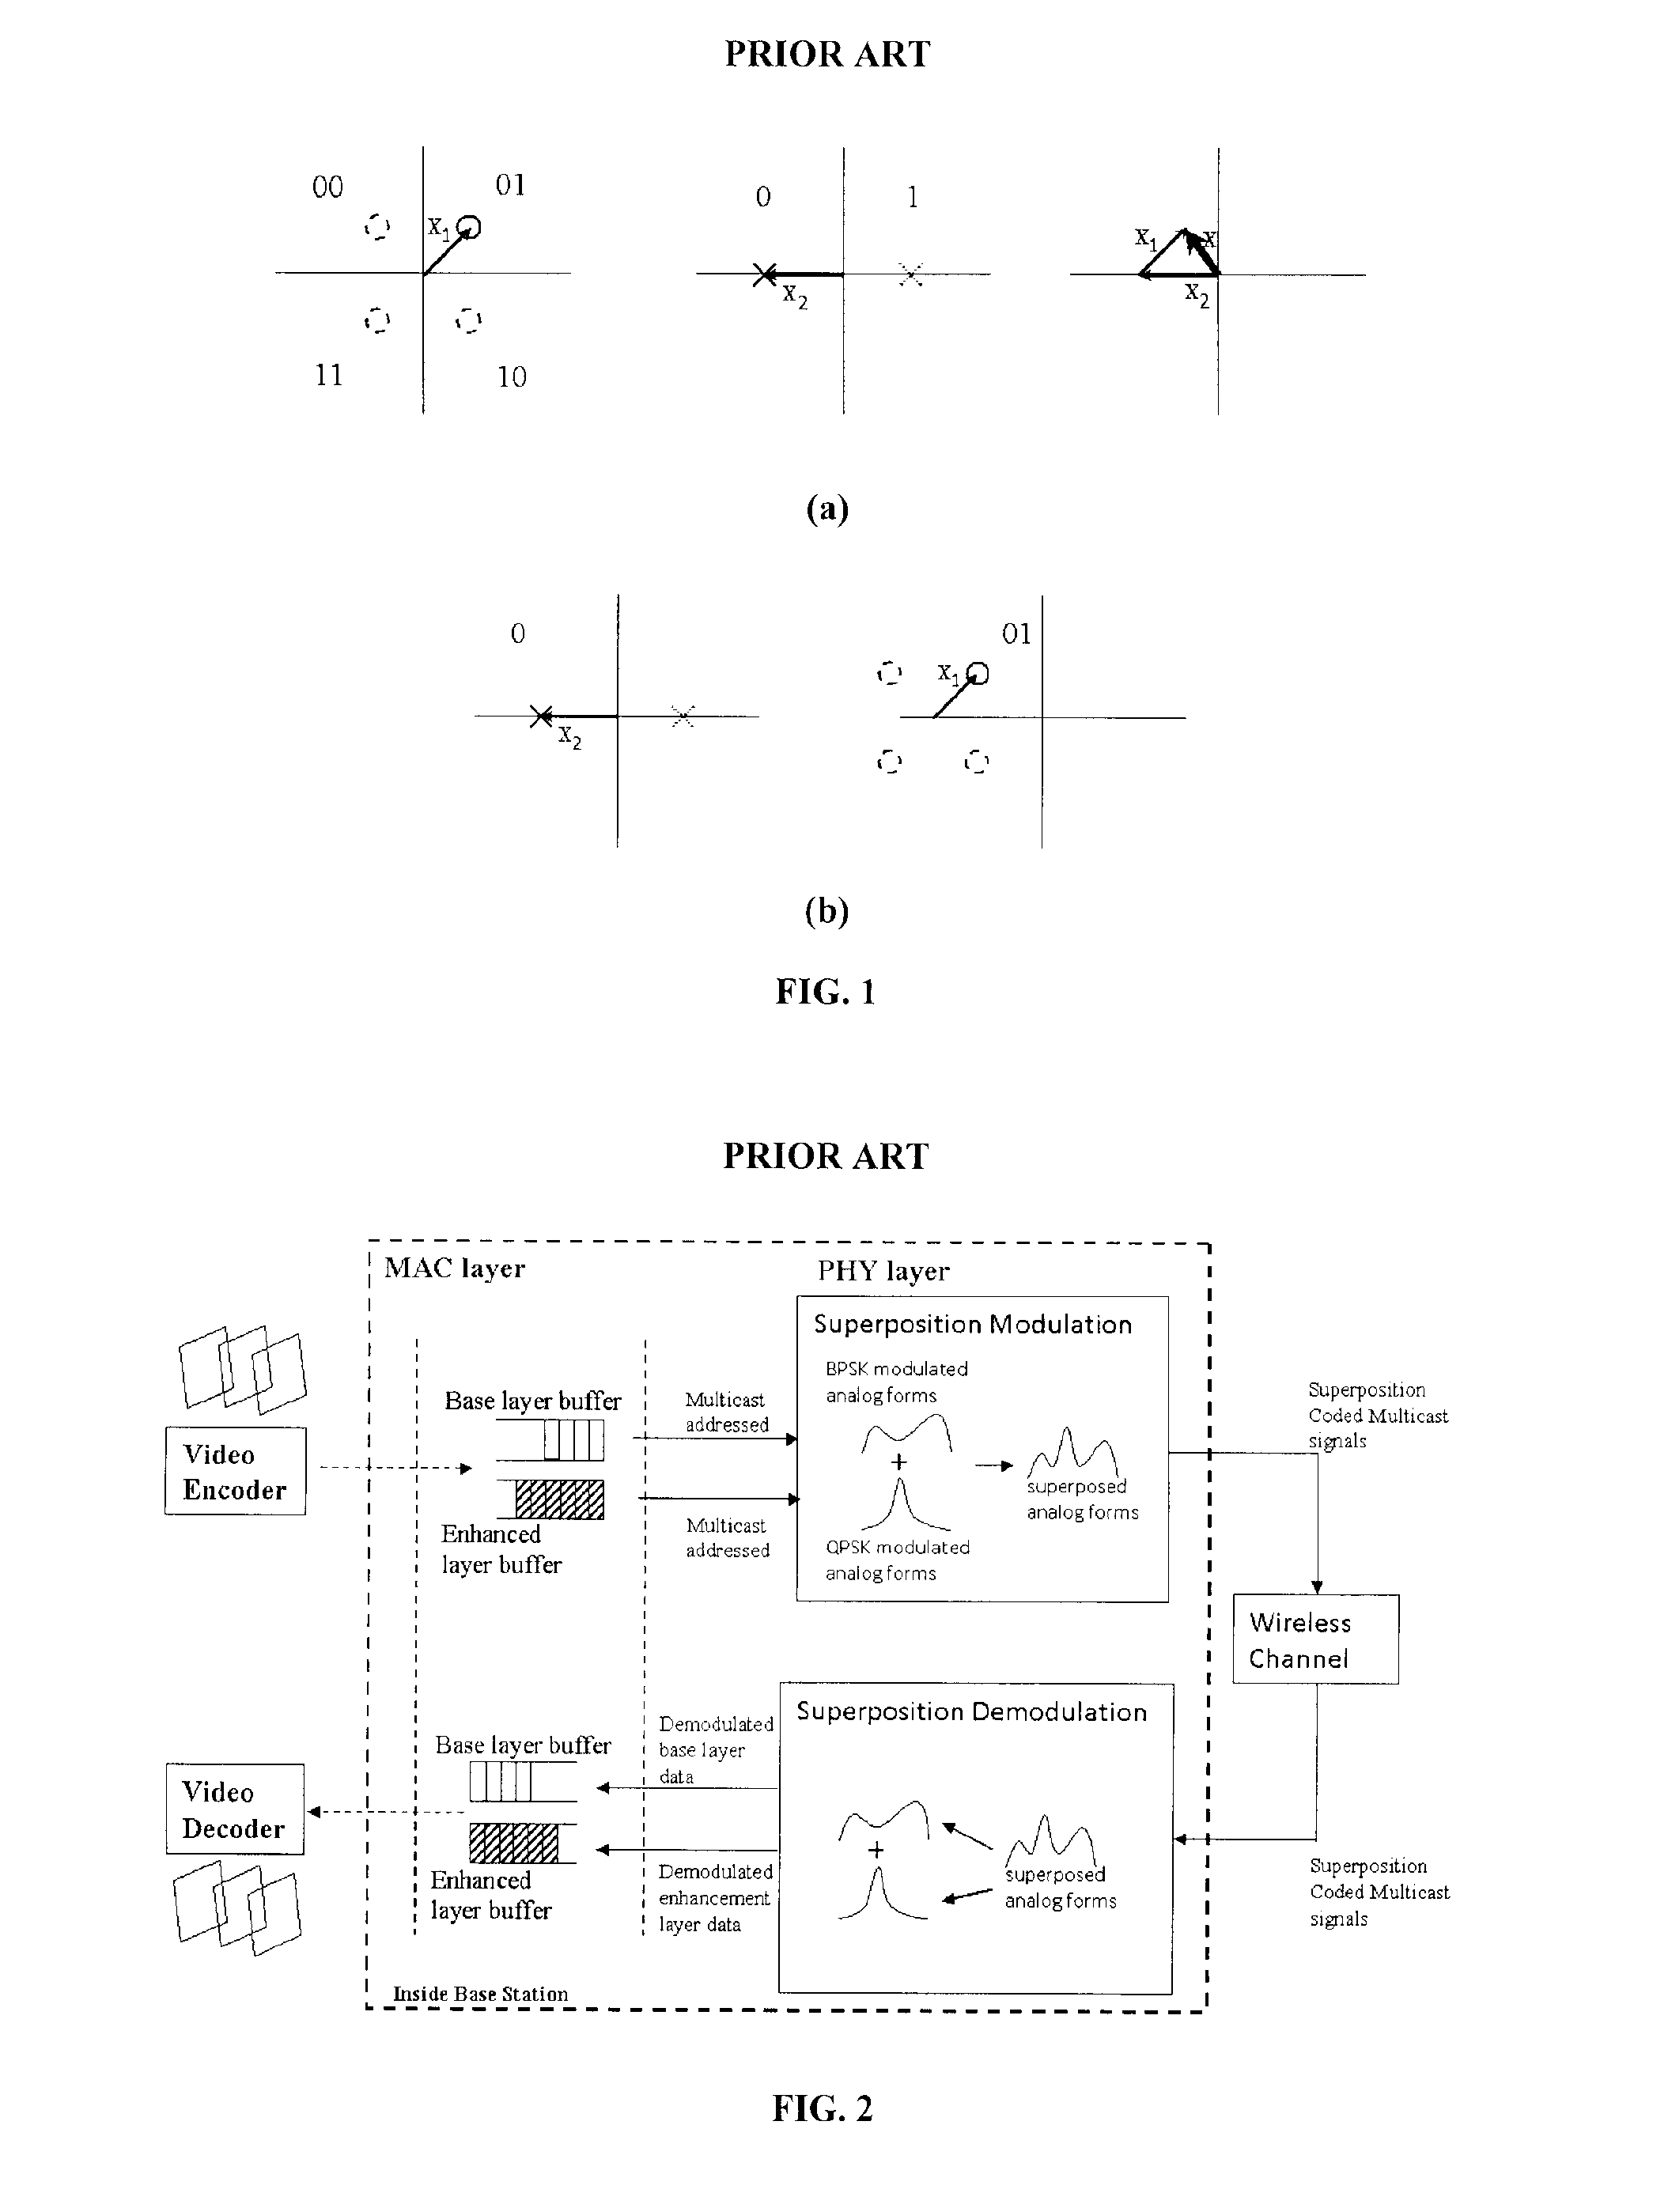 System, method, and computer program for superposition coded multicast with a single modulation scheme